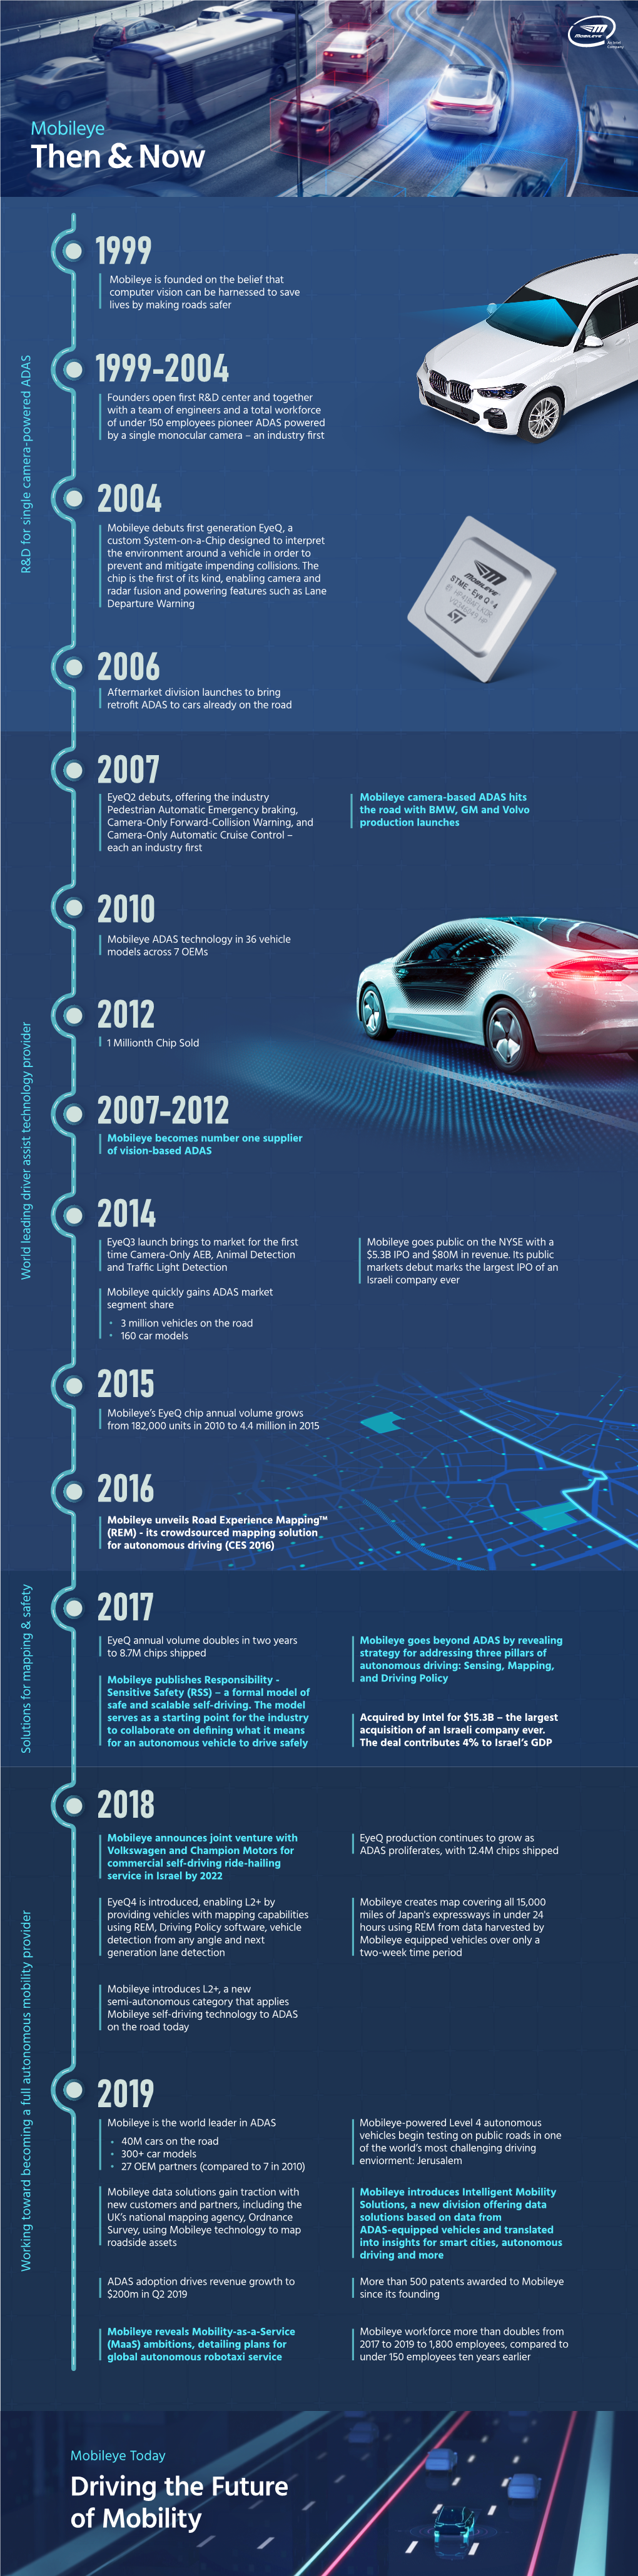 Mobileye Today Driving the Future of Mobility